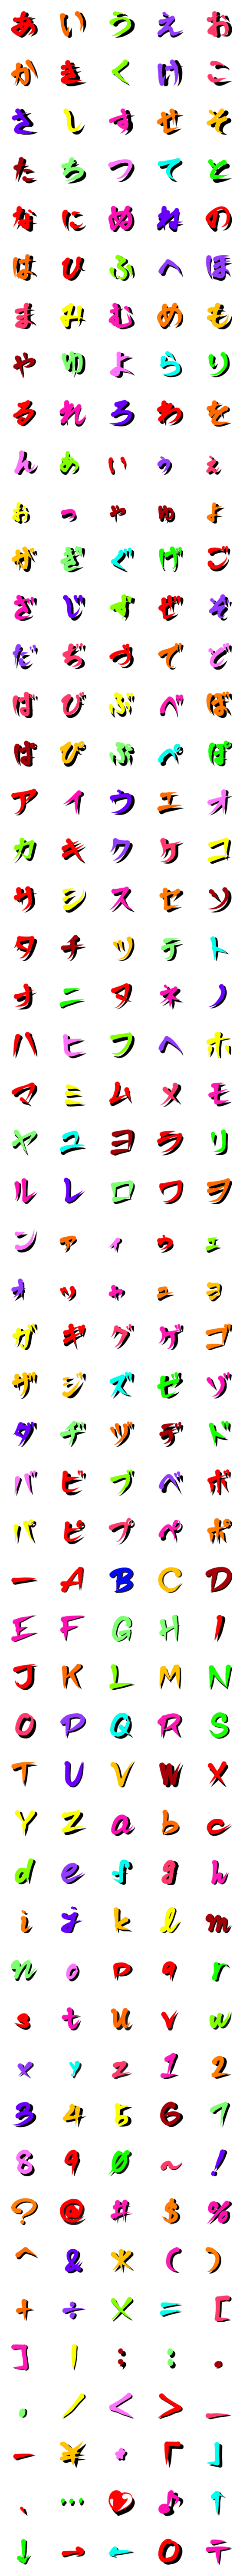 [LINE絵文字]影のある癖のある文字の画像一覧